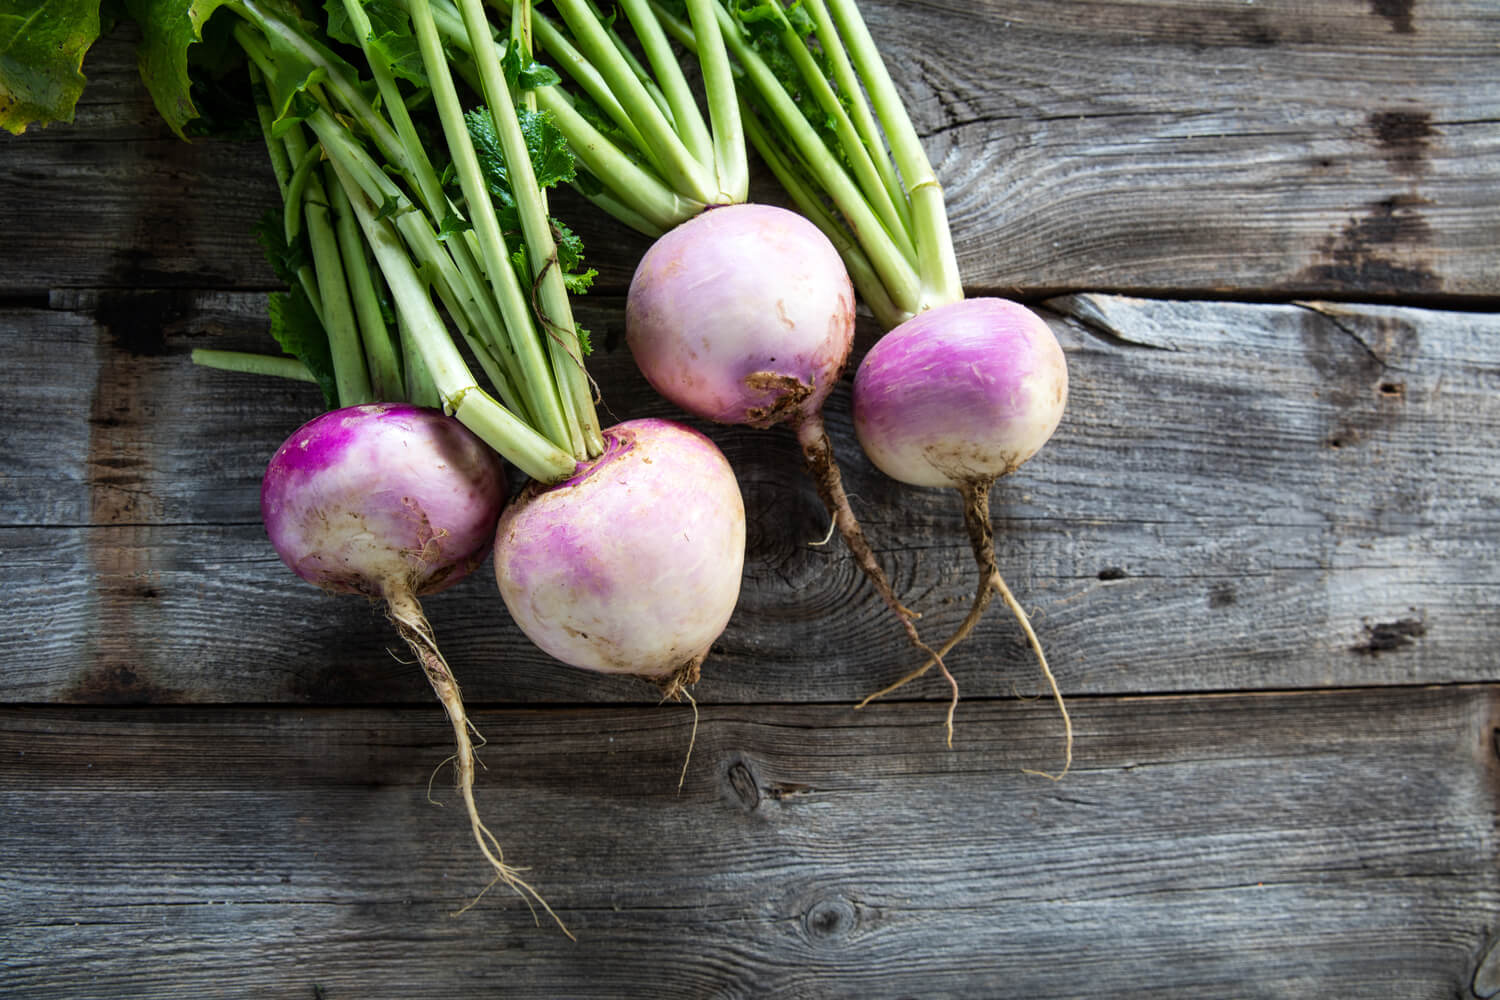 turnips during pregnancy